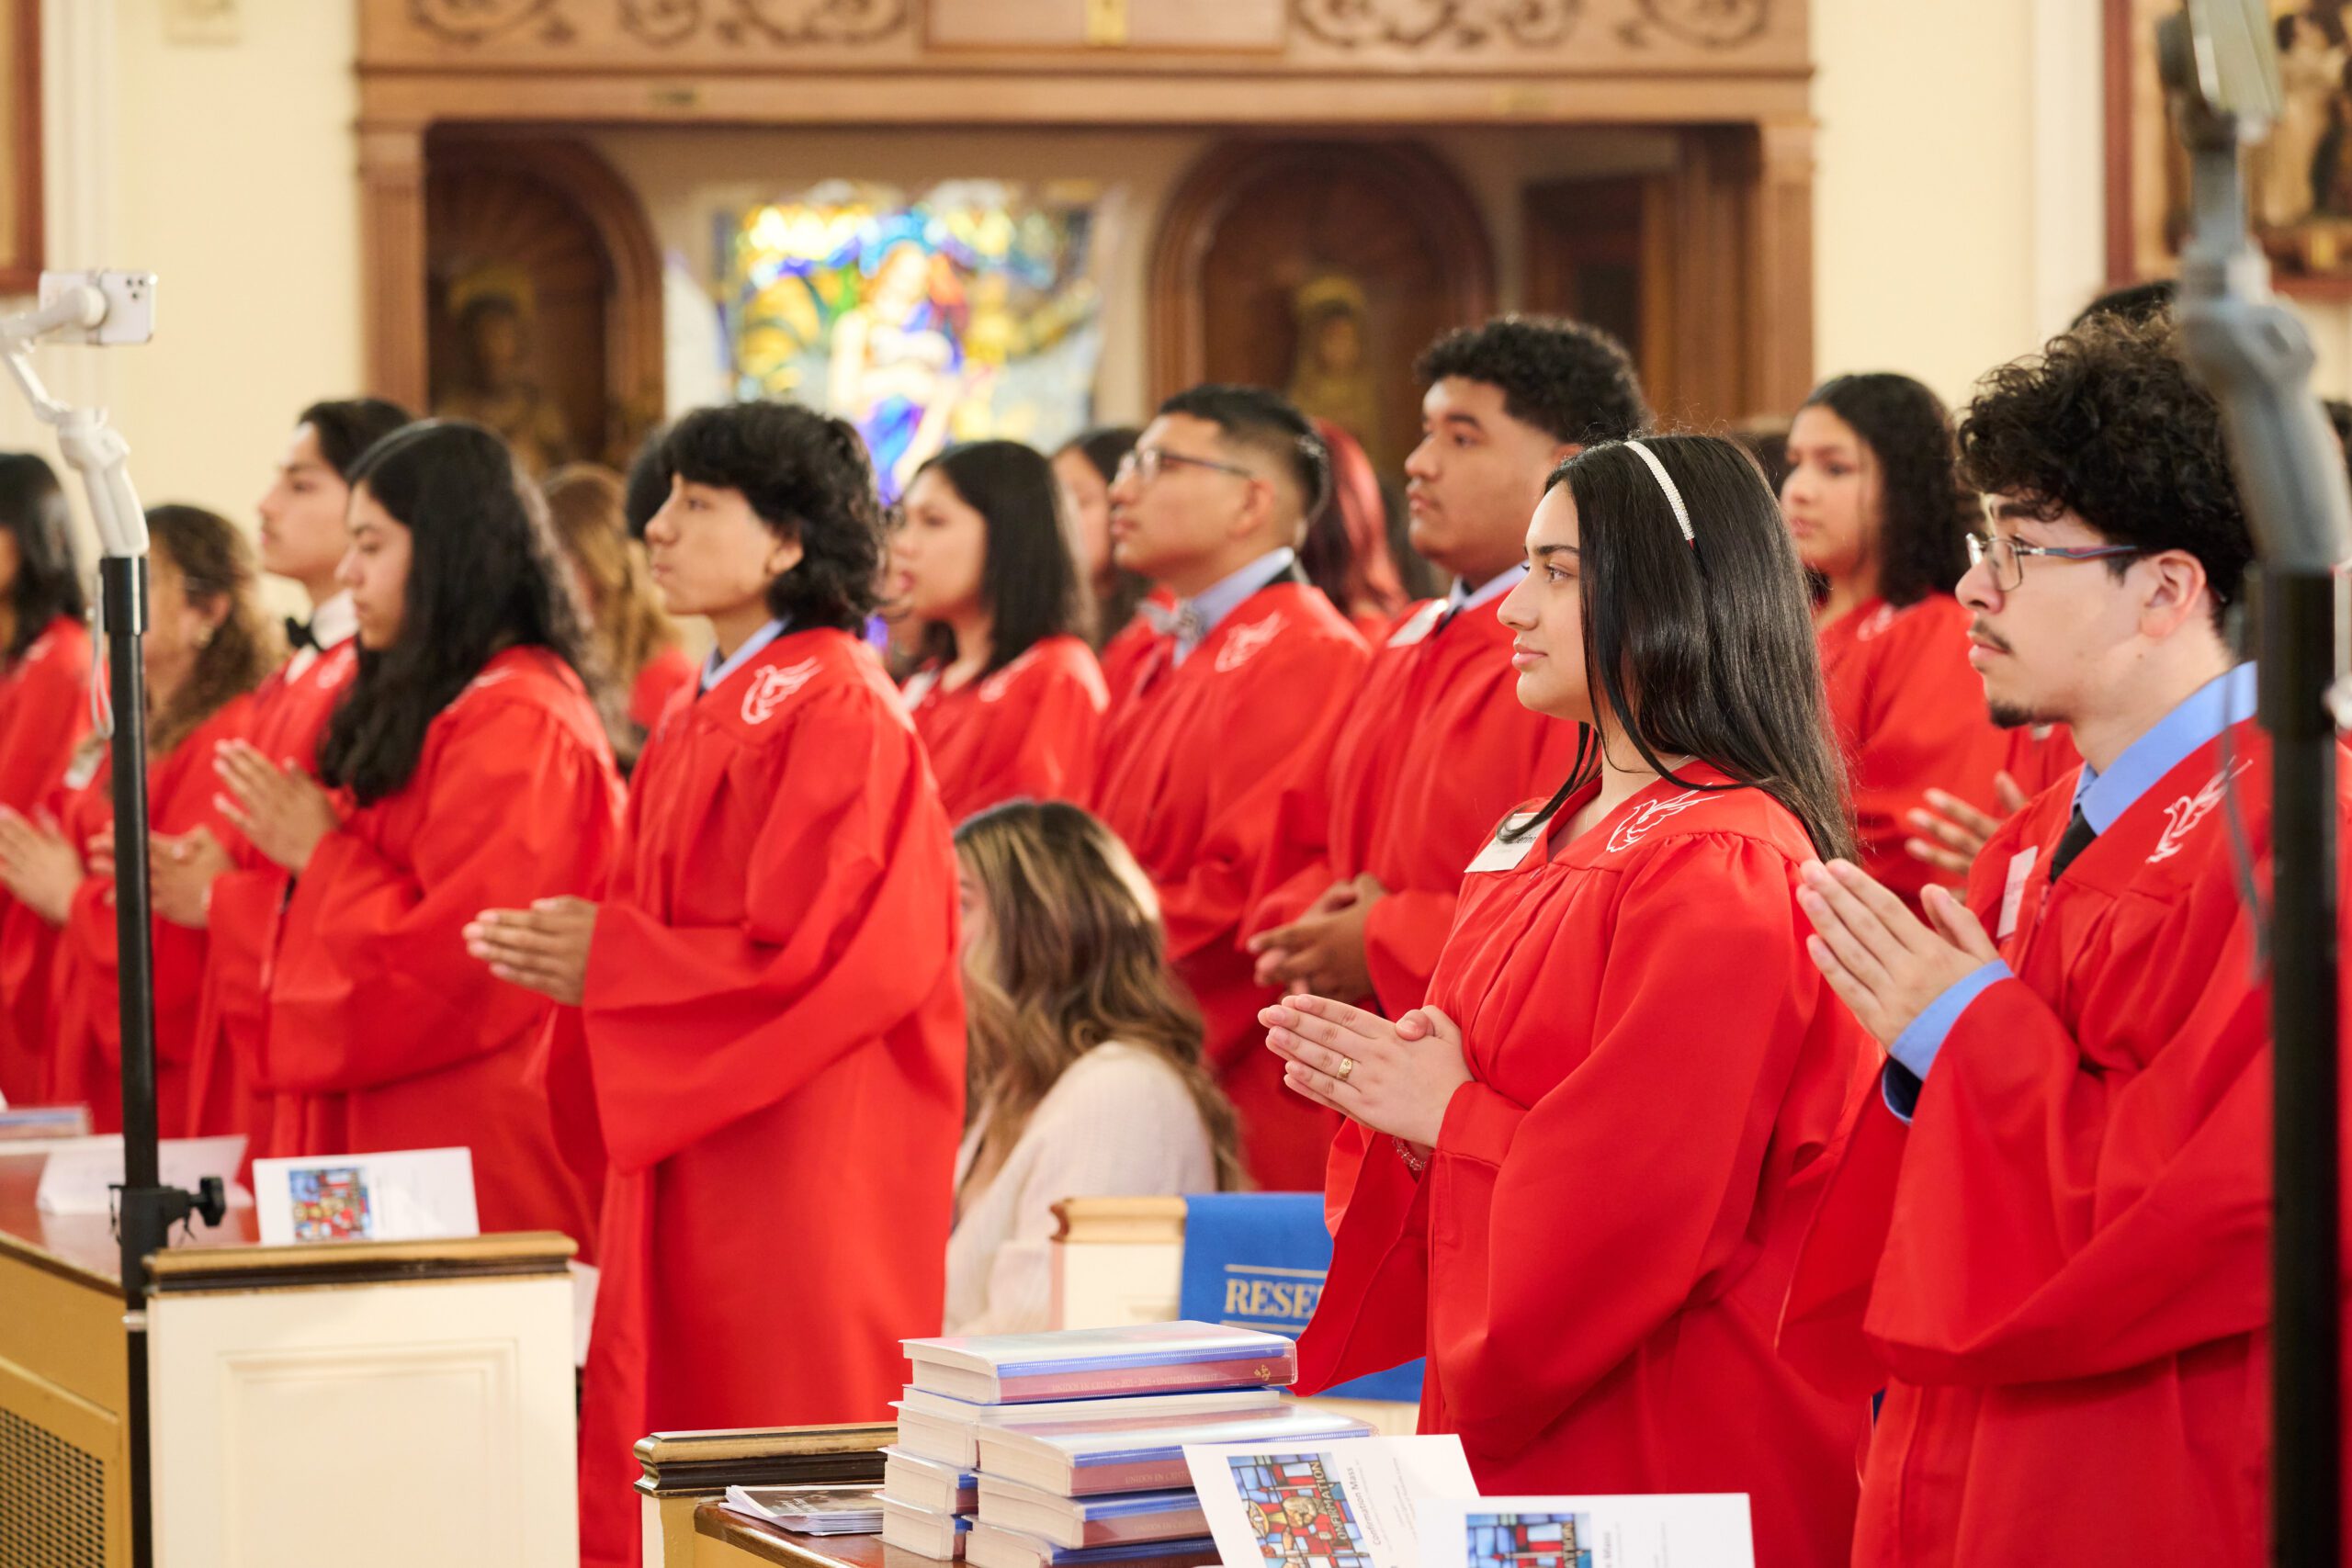 Second Year Confirmation Students to be Confirmed on June 9